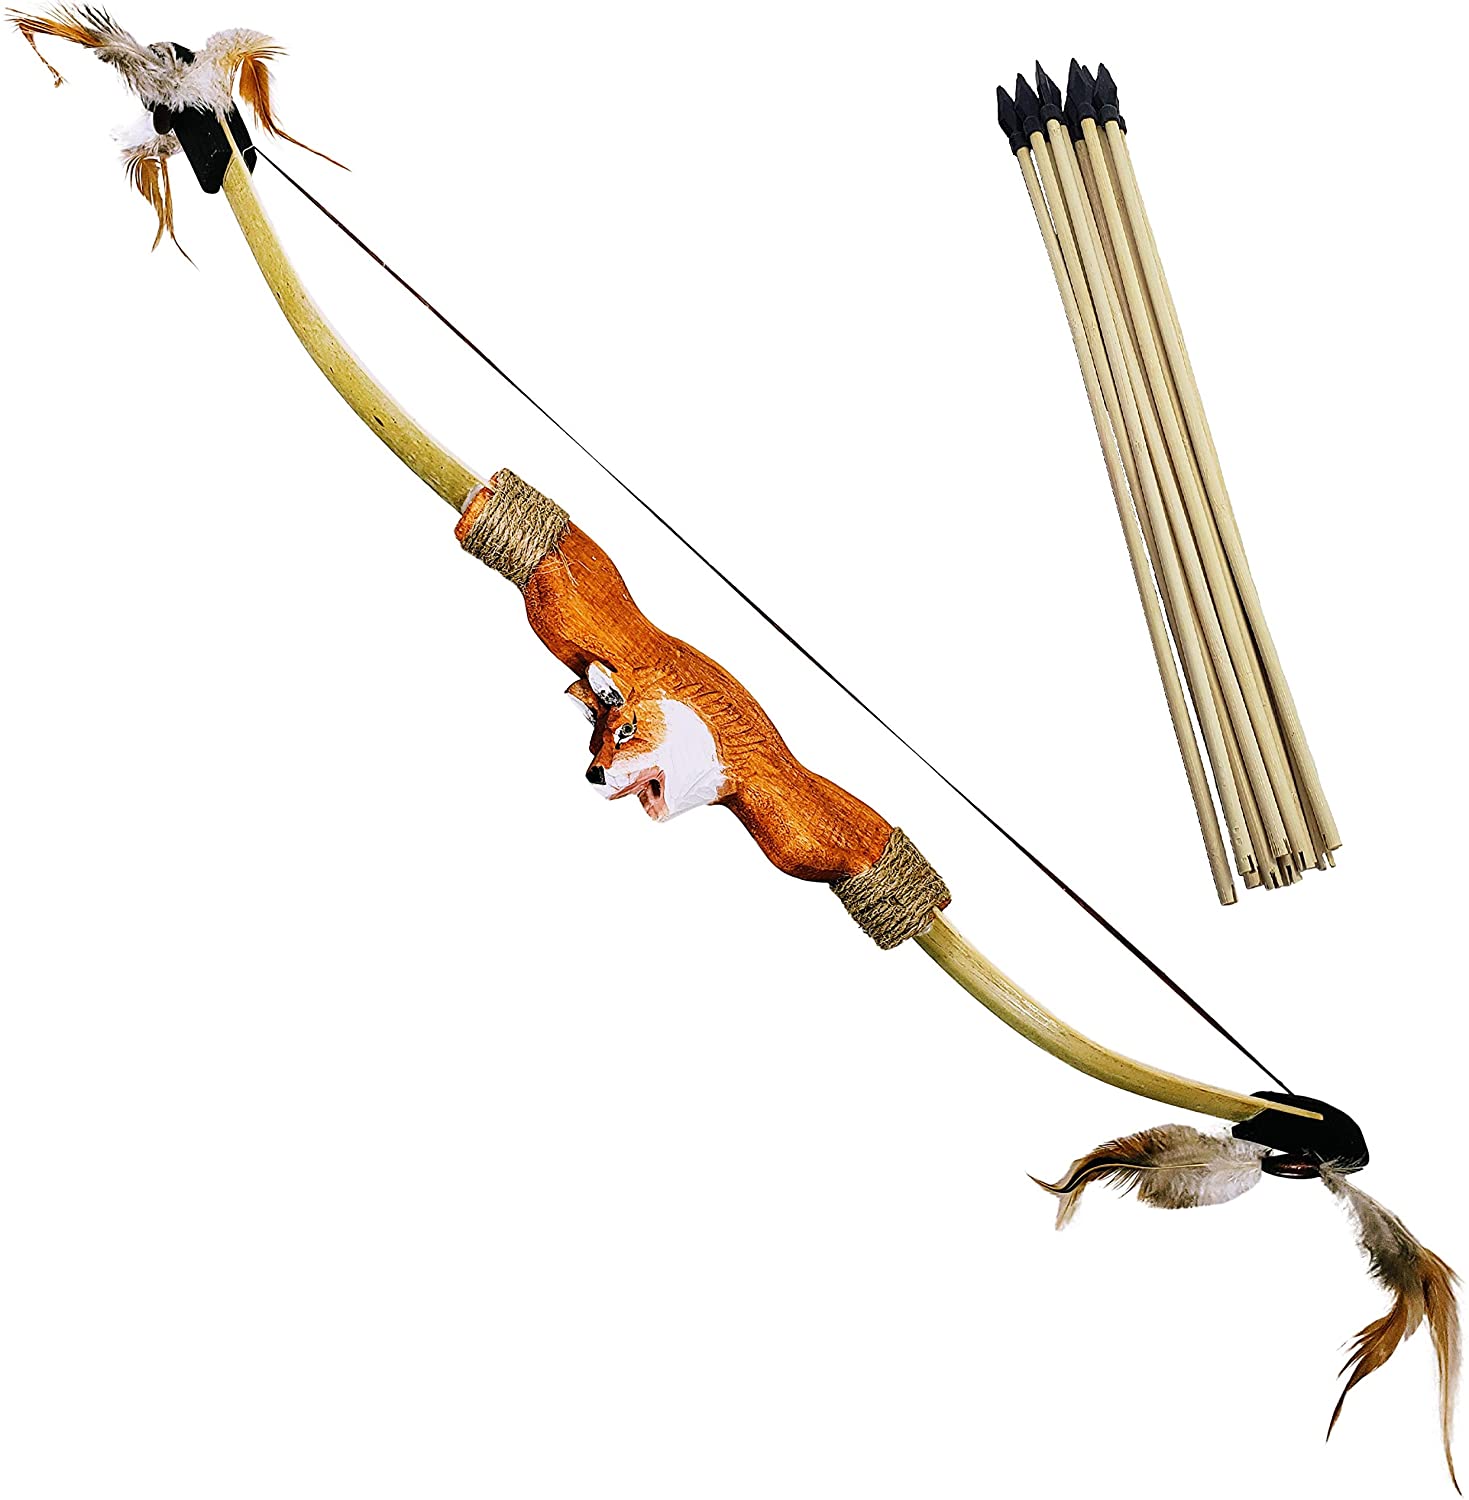 Handcarved Animal Wooden Bow and Arrow Set - 10 Wood Arrows